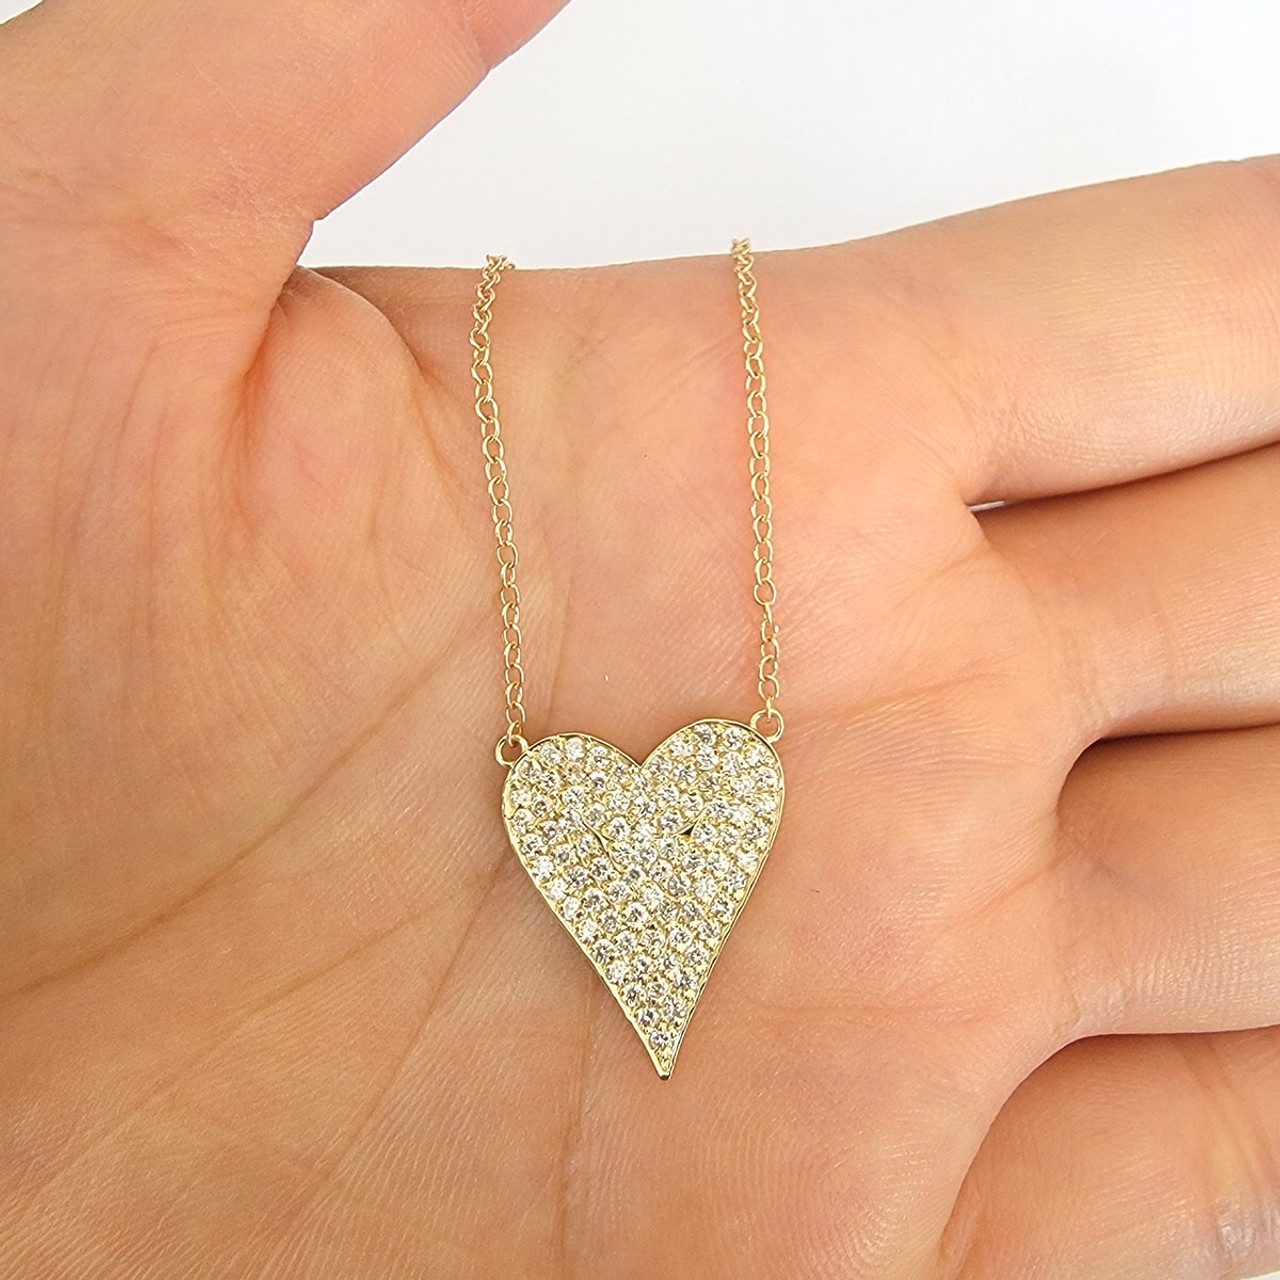 Buy Genuine Diamond Heart Pendant Necklace, Flat Pave Dainty Classic  Minimalist Layering, 14k Gold, Social Value Online in India - Etsy